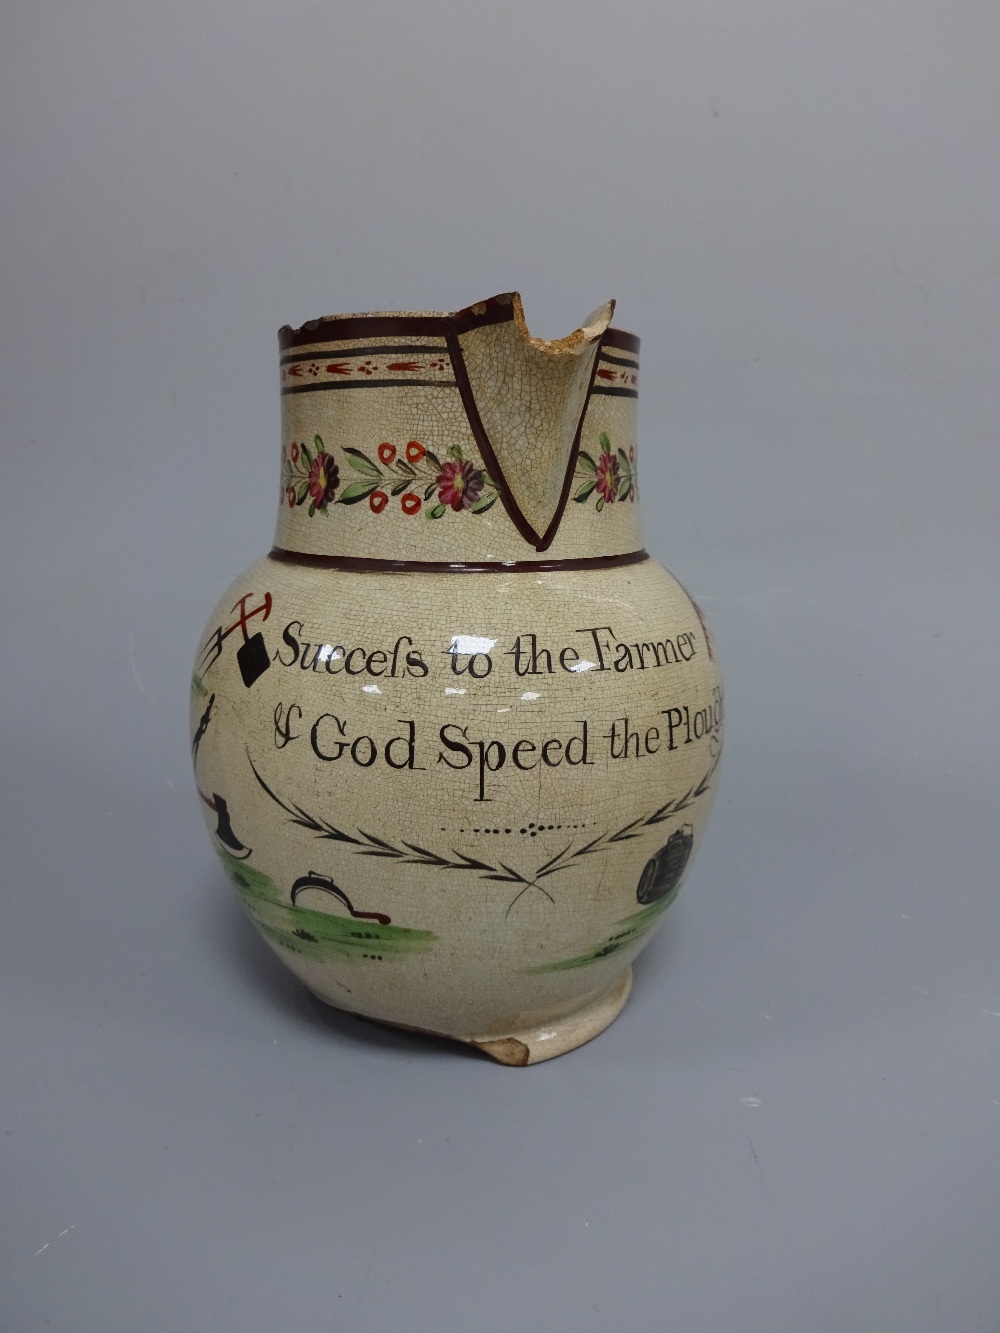 A 19TH CENTURY PEARLWARE JUG, inscribed Succefs to the Farmer & God Speed the Plough and decorated